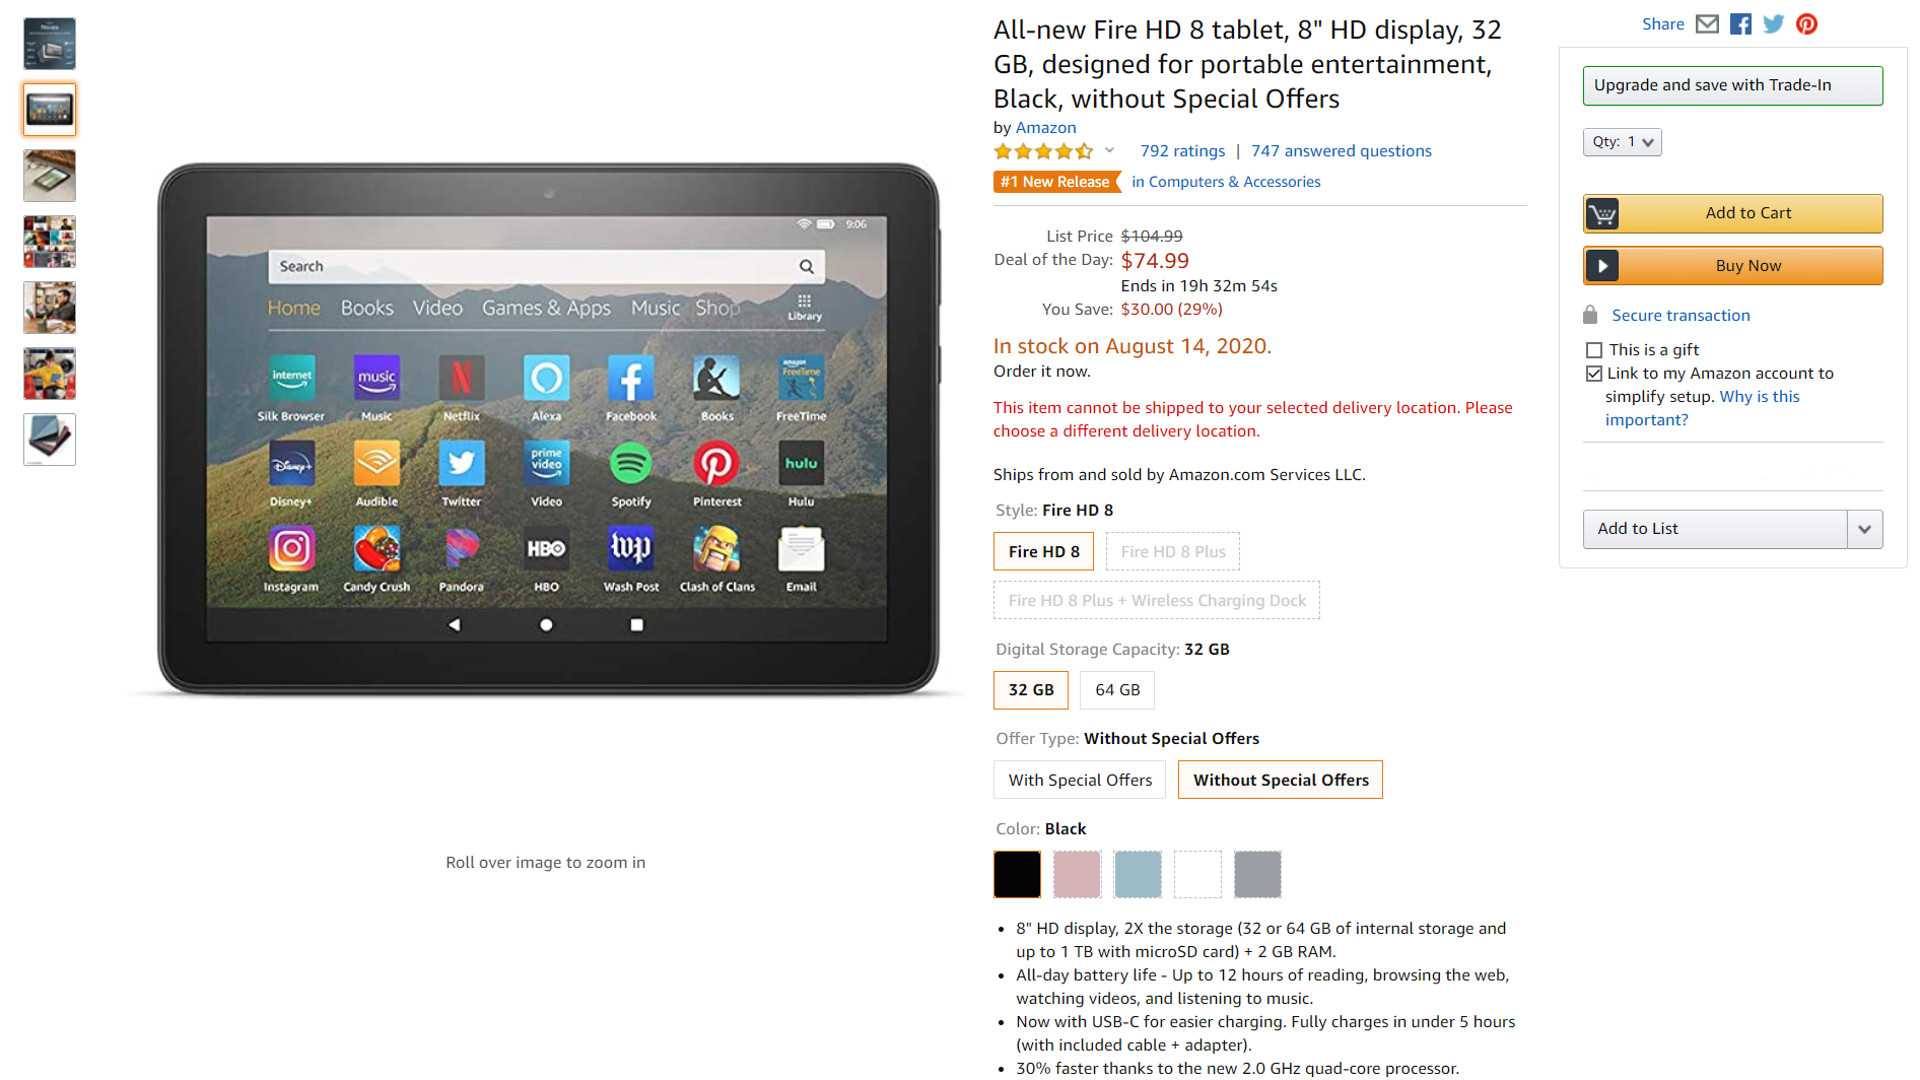 The Amazon Fire HD 8 tablet is 30 percent off today.